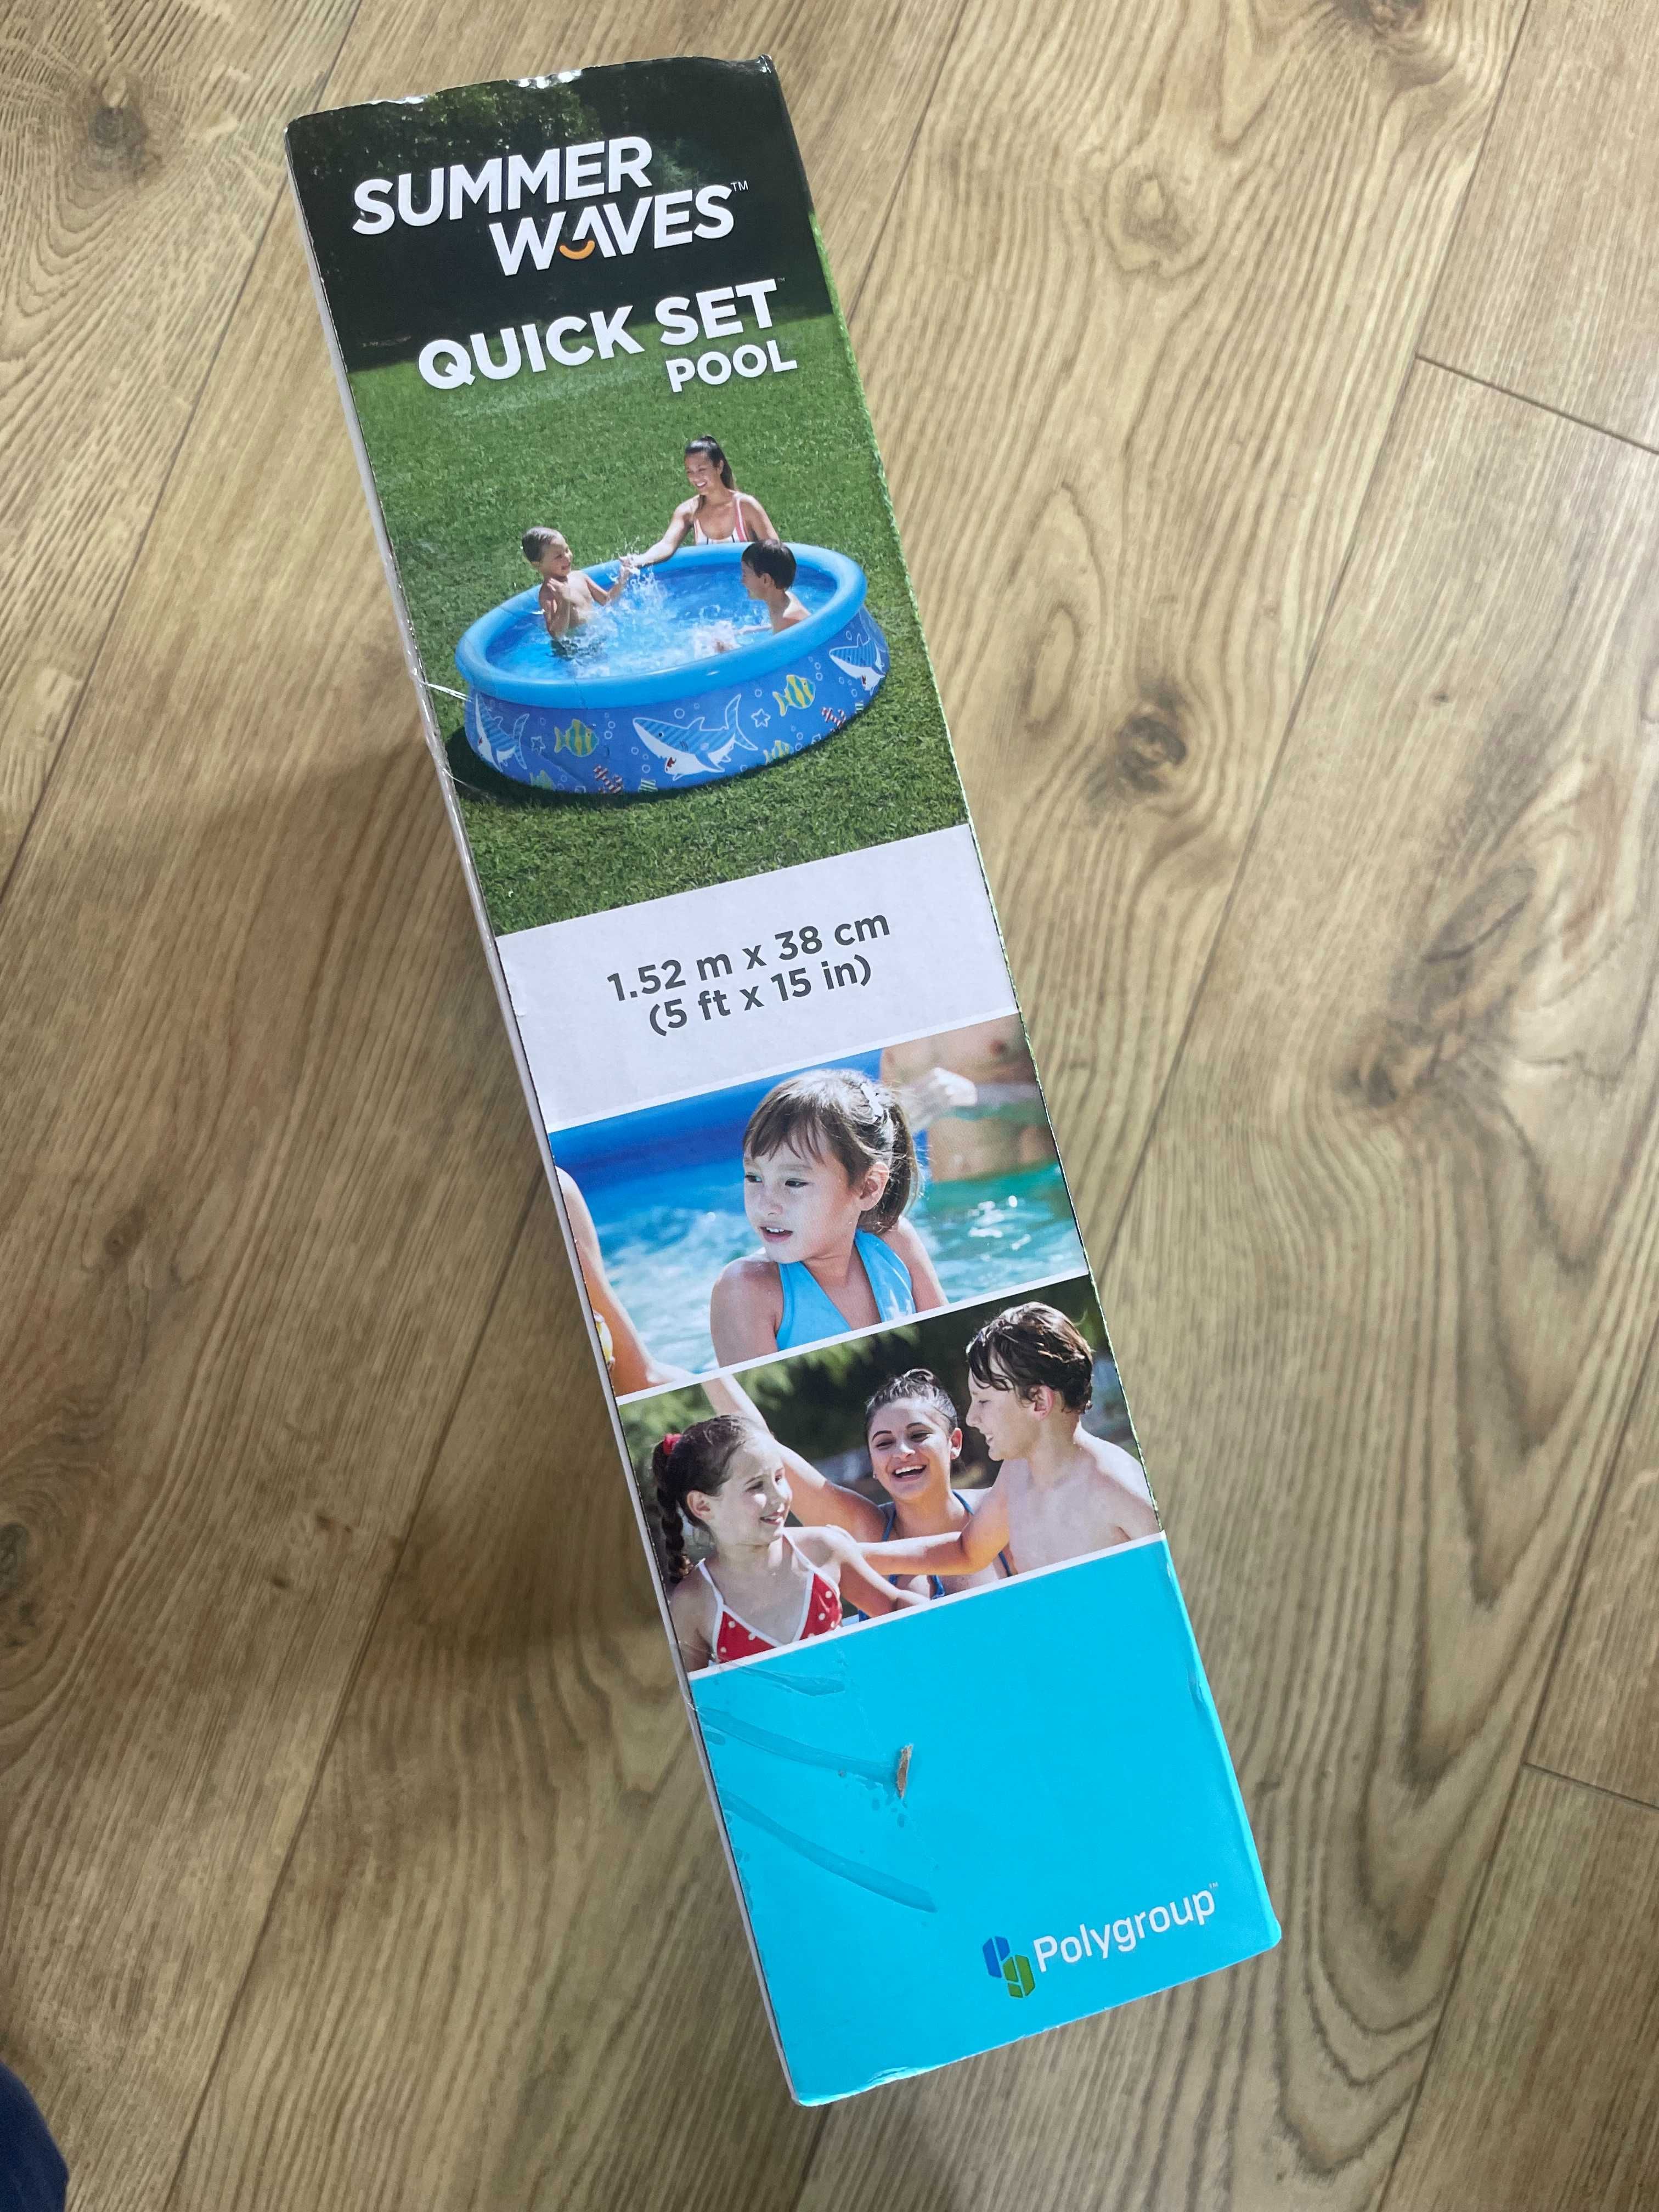 Basen Summer Waves Quick set pool 1,5m, nowy !